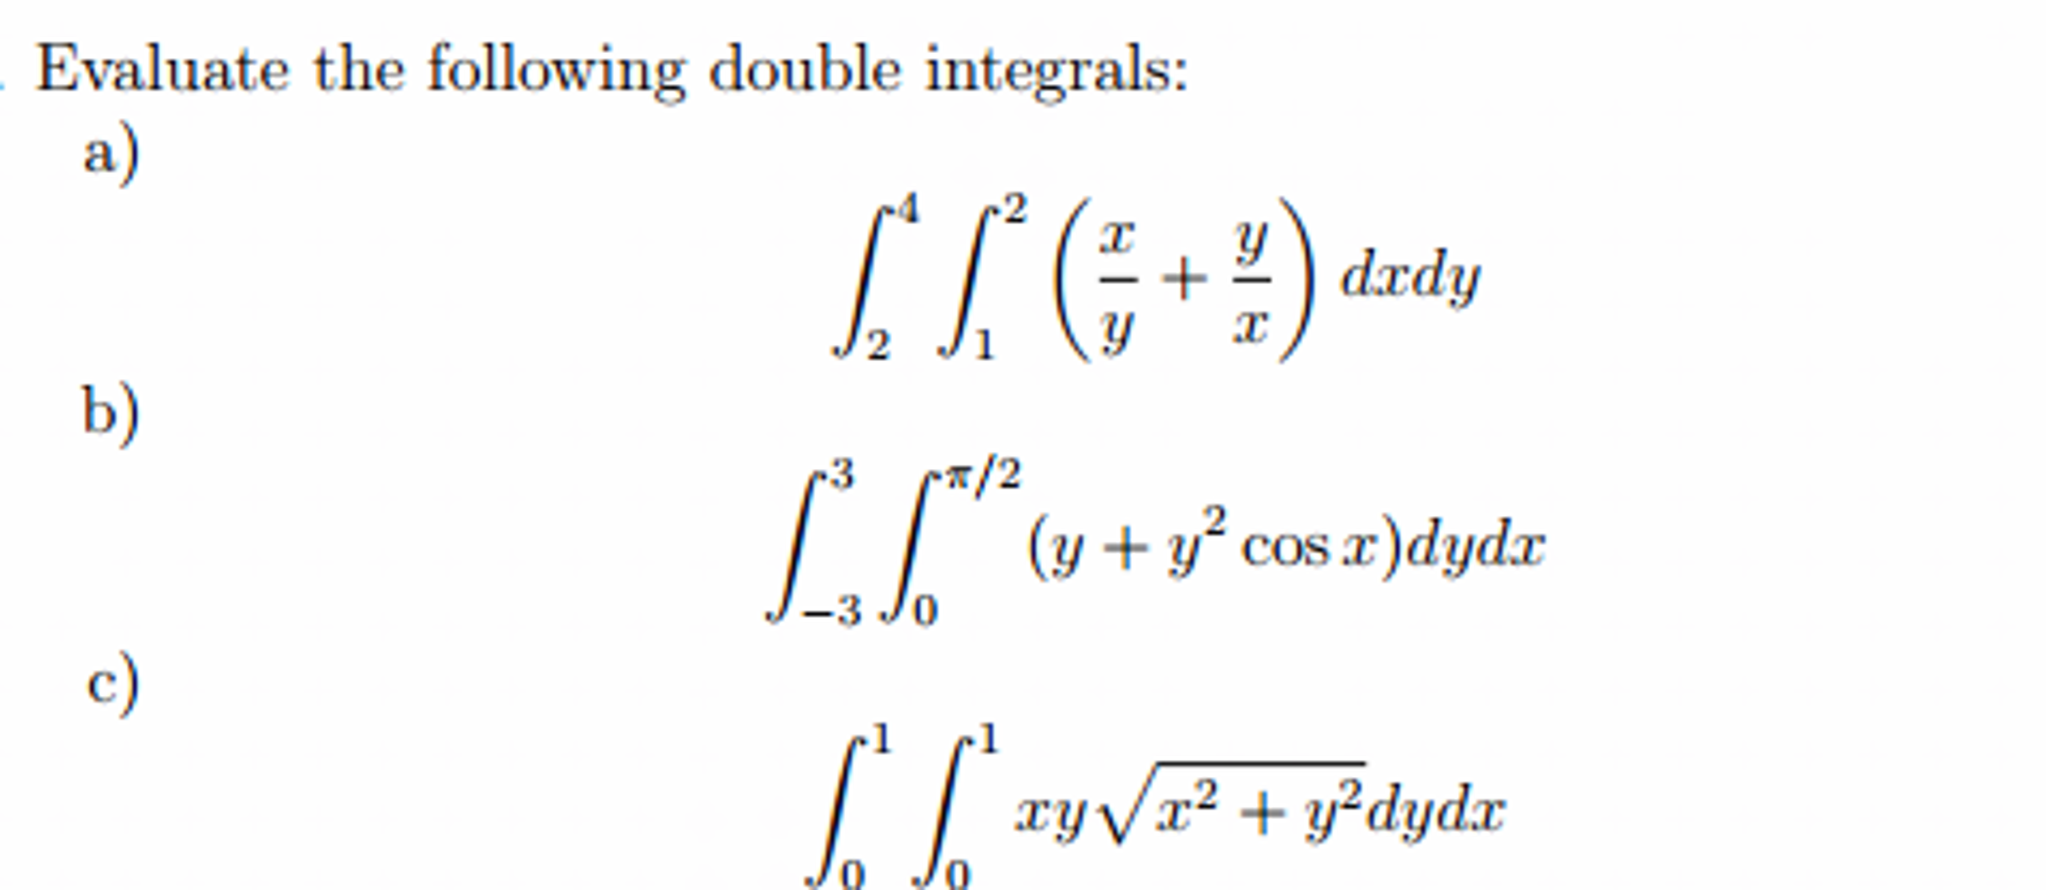 solved-evaluate-the-following-double-integrals-chegg